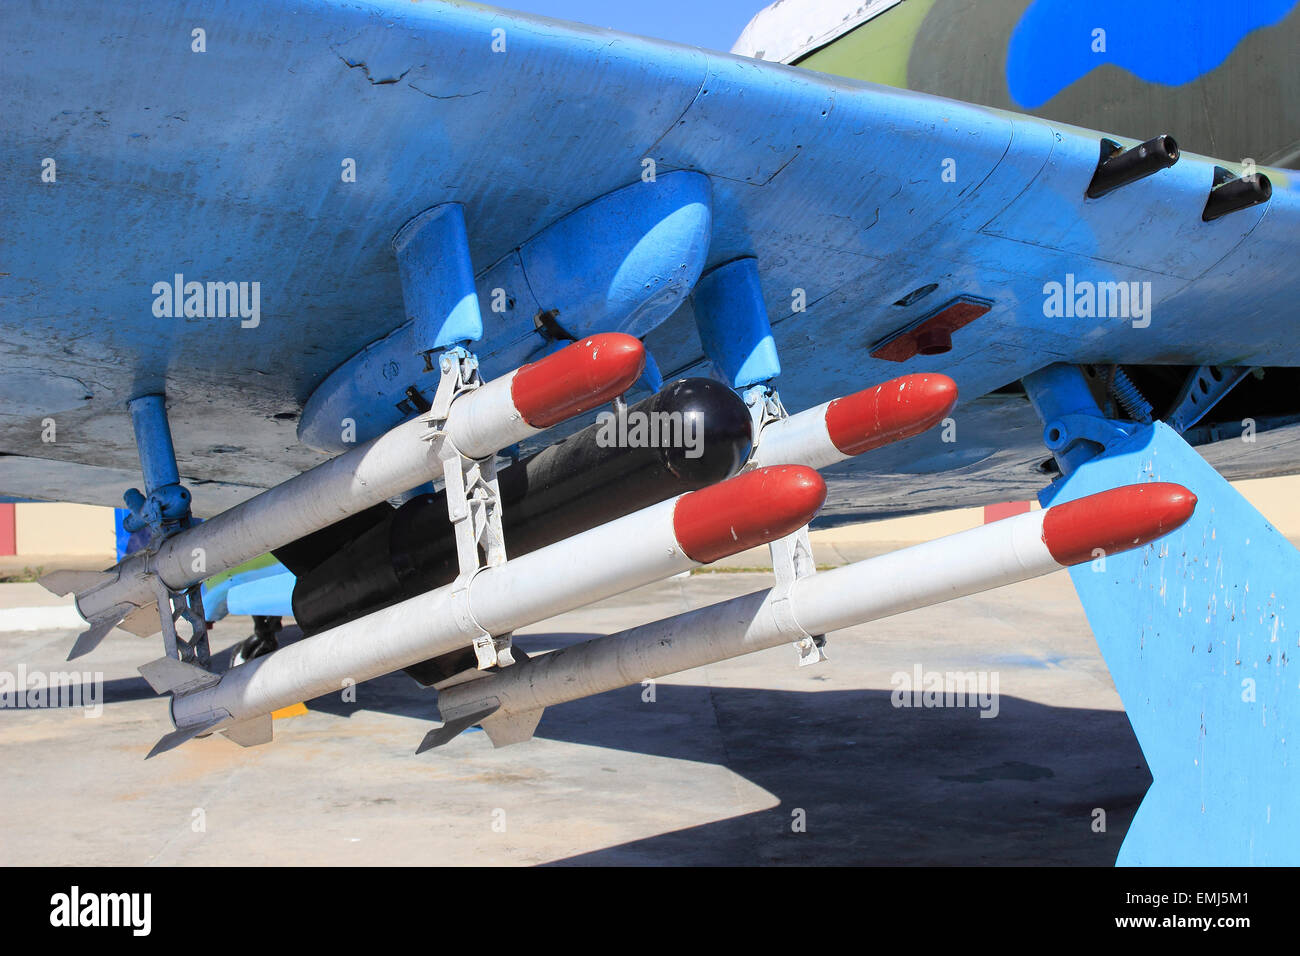 Rockets on Downed airplane Bay of Pigs Museum Playa Giron Cuba Stock Photo